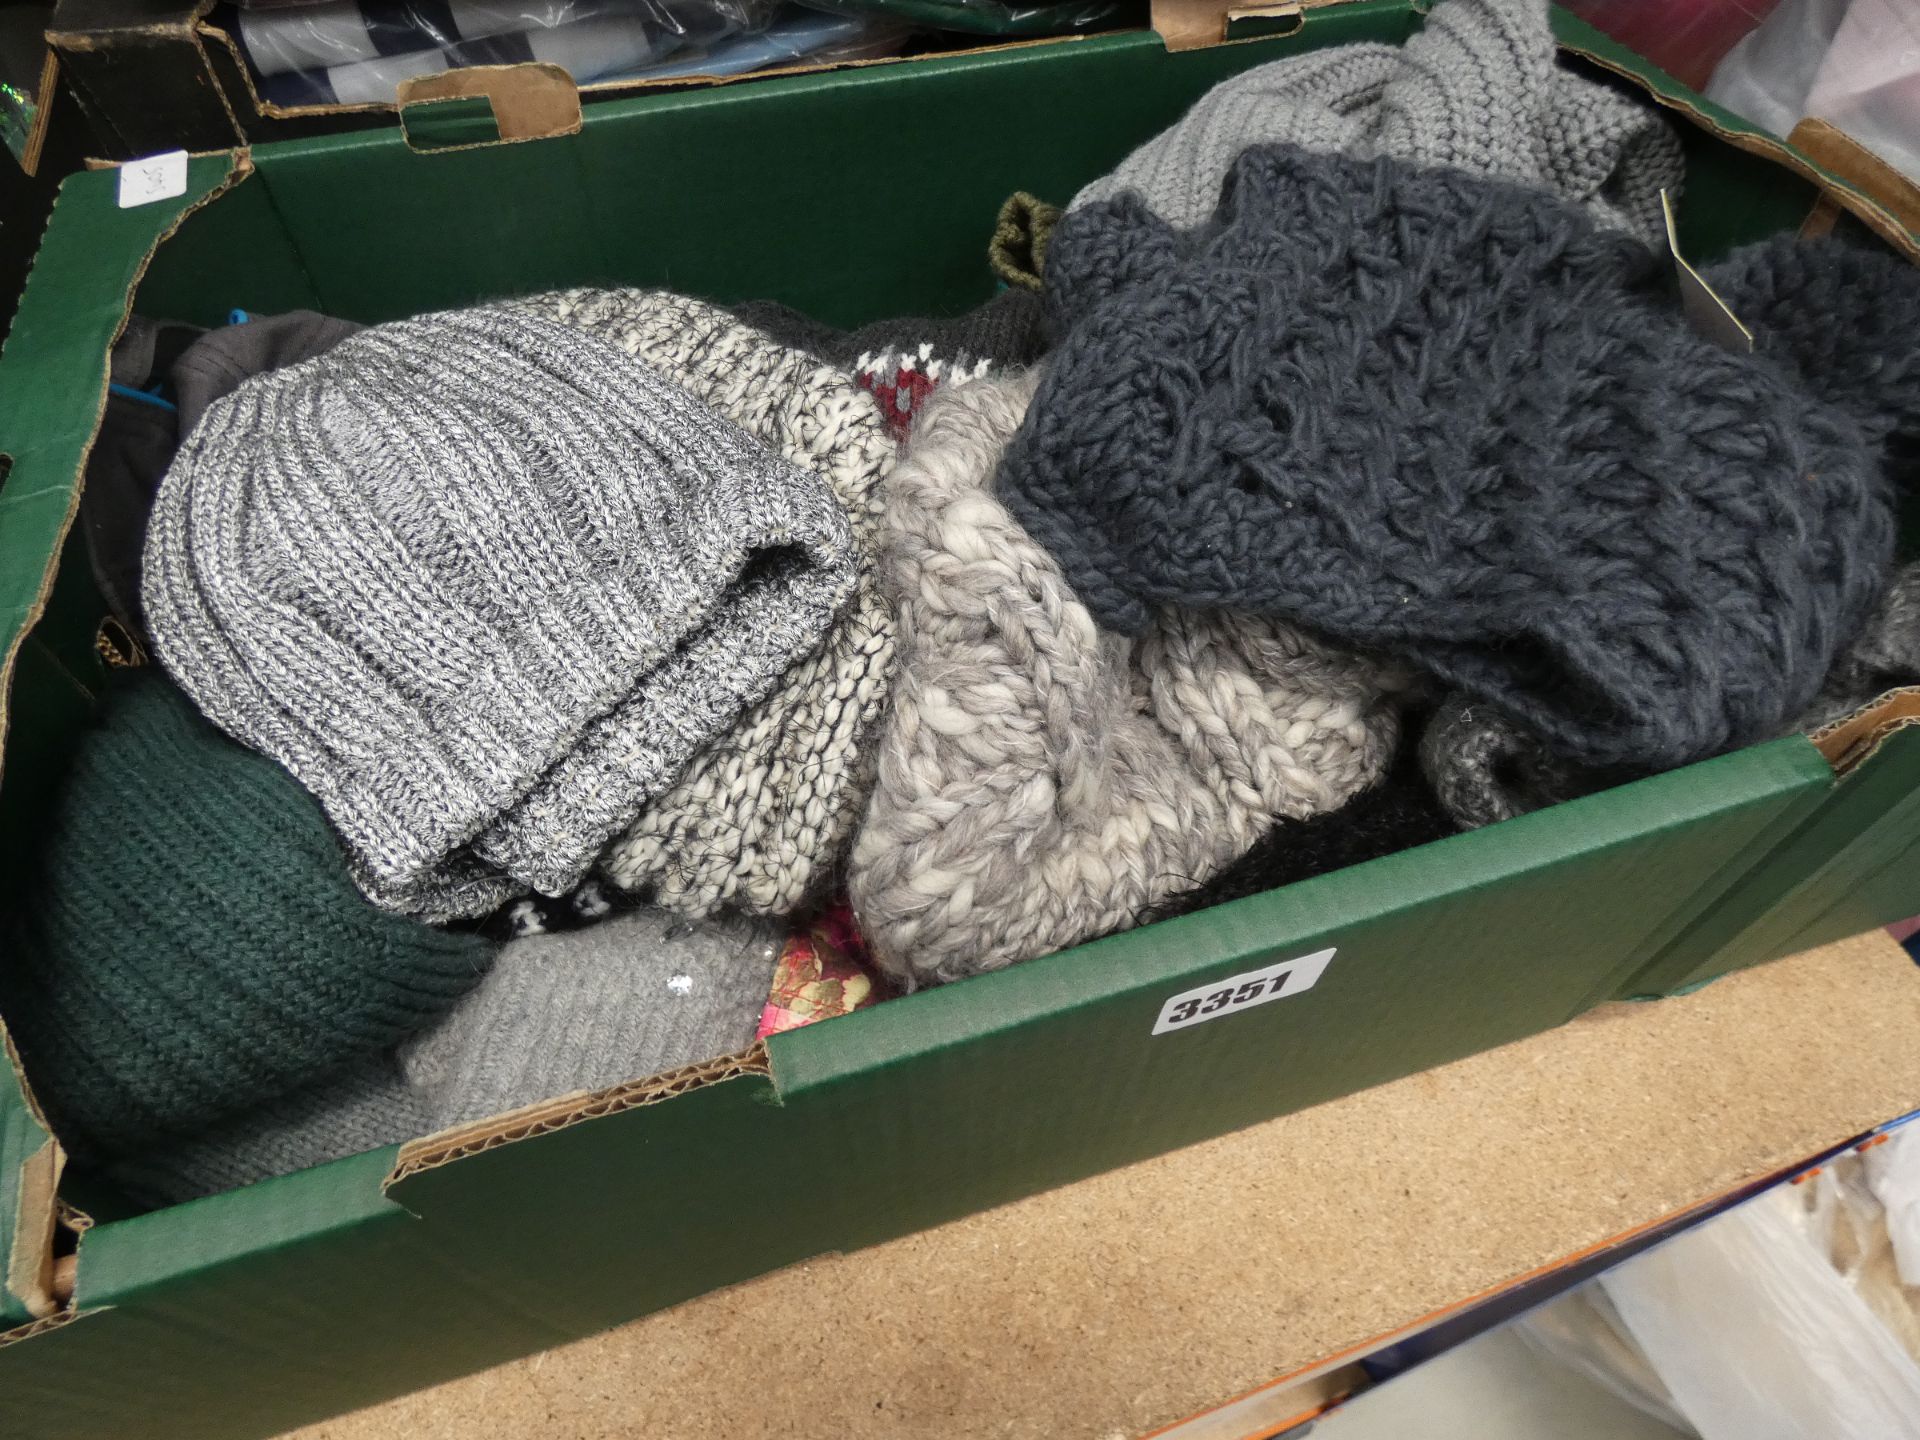 Tray containing mixed wooly hats